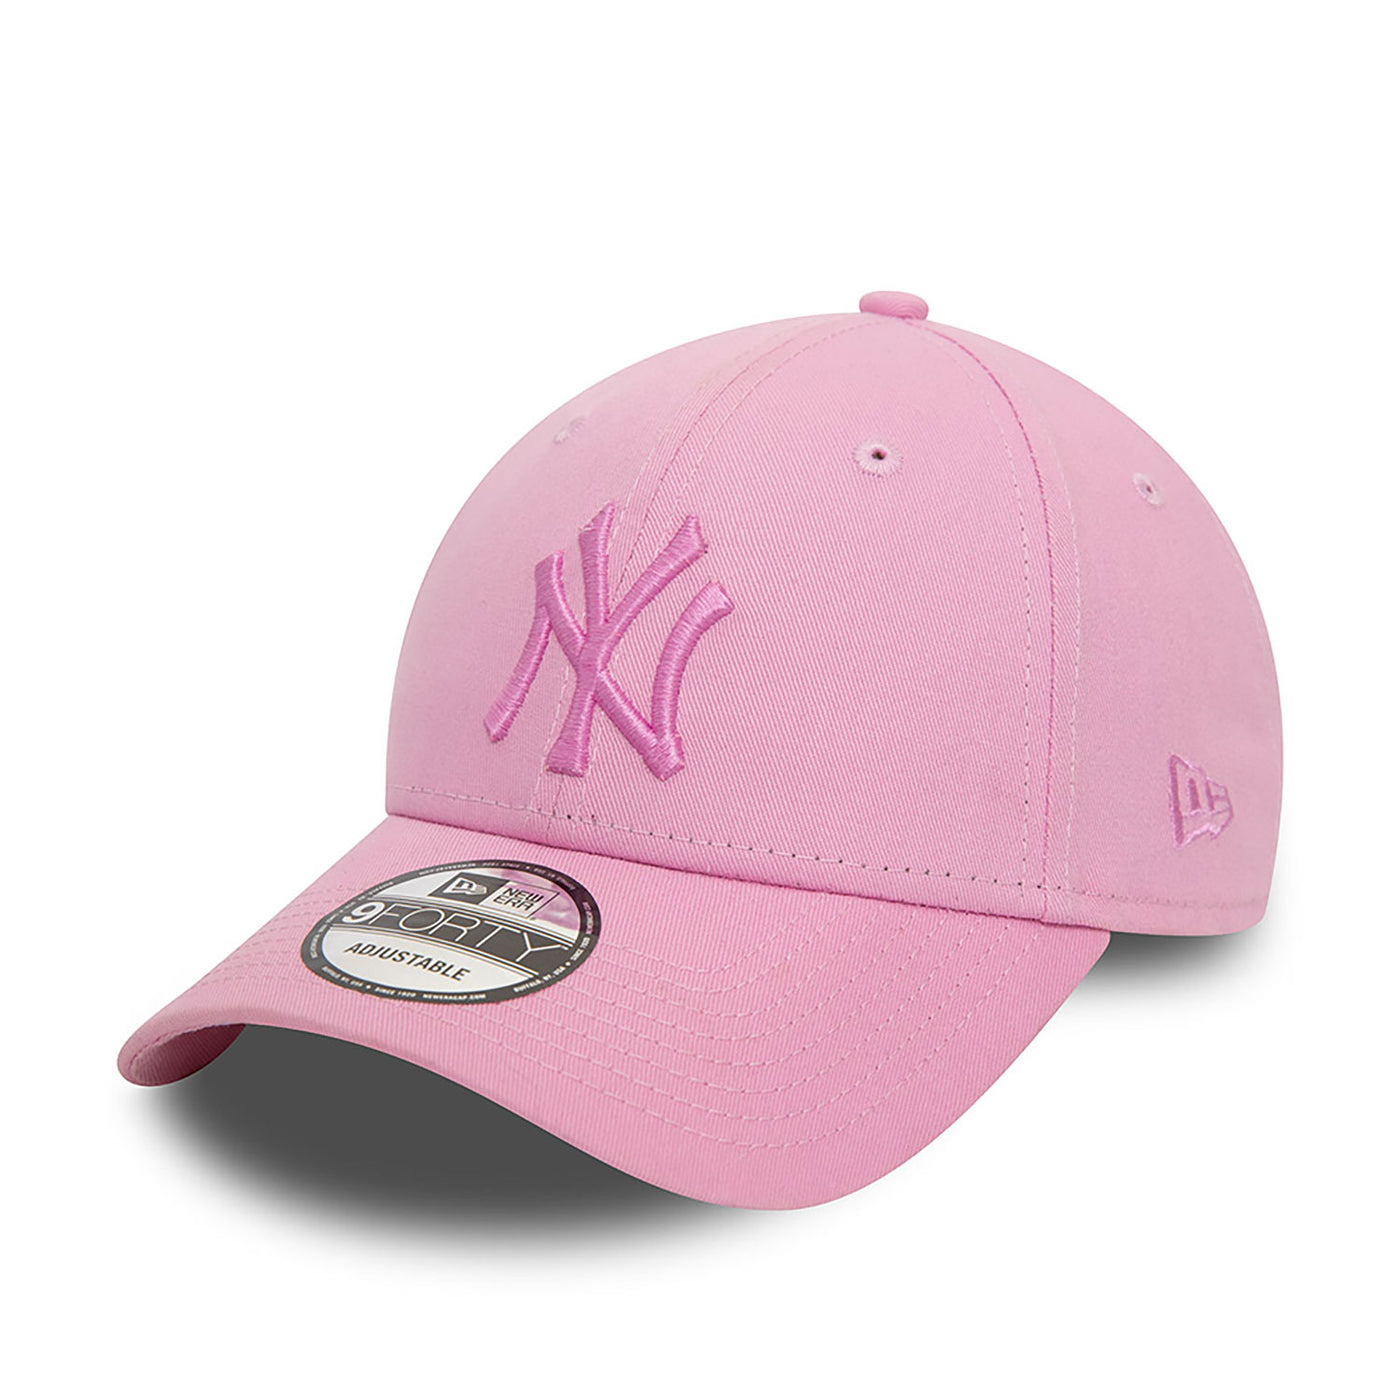 CAPPELLO 9FORTY NEW YORK YANKEES LEAGUE ESSENTIAL ROSA NEW ERA DONNA